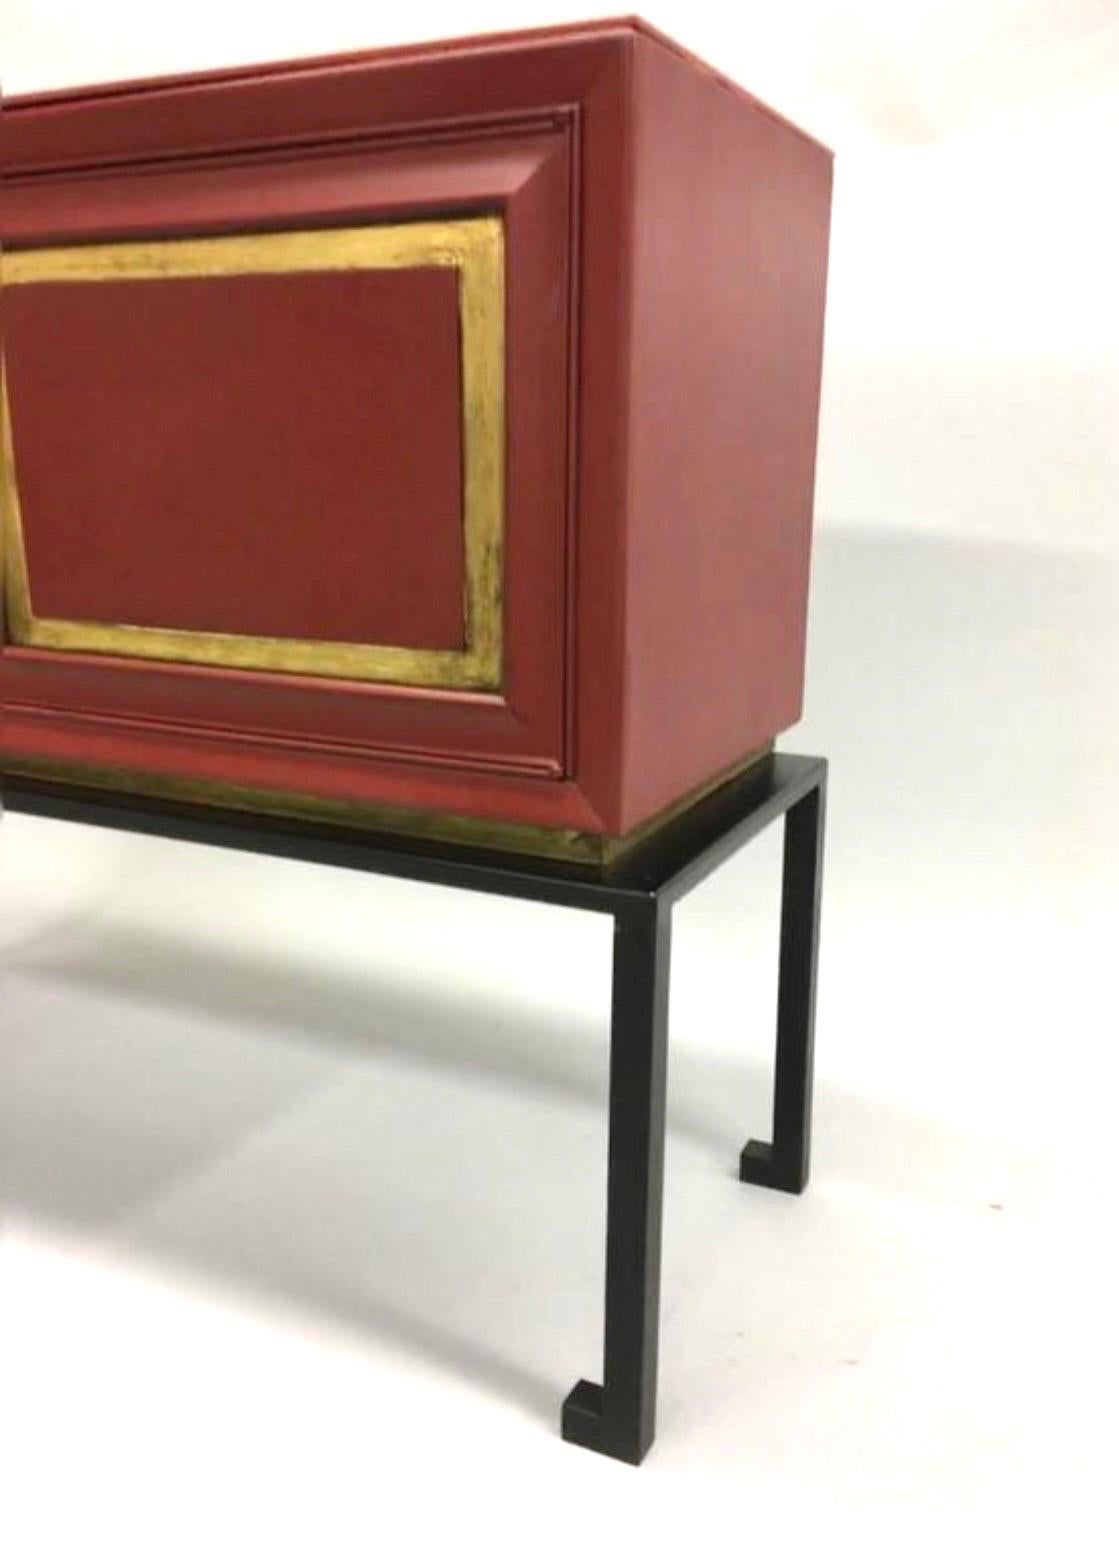 2 French Modern Neoclassical Chinese Red Lacquer Sideboards by Jacques Adnet In Good Condition For Sale In New York, NY